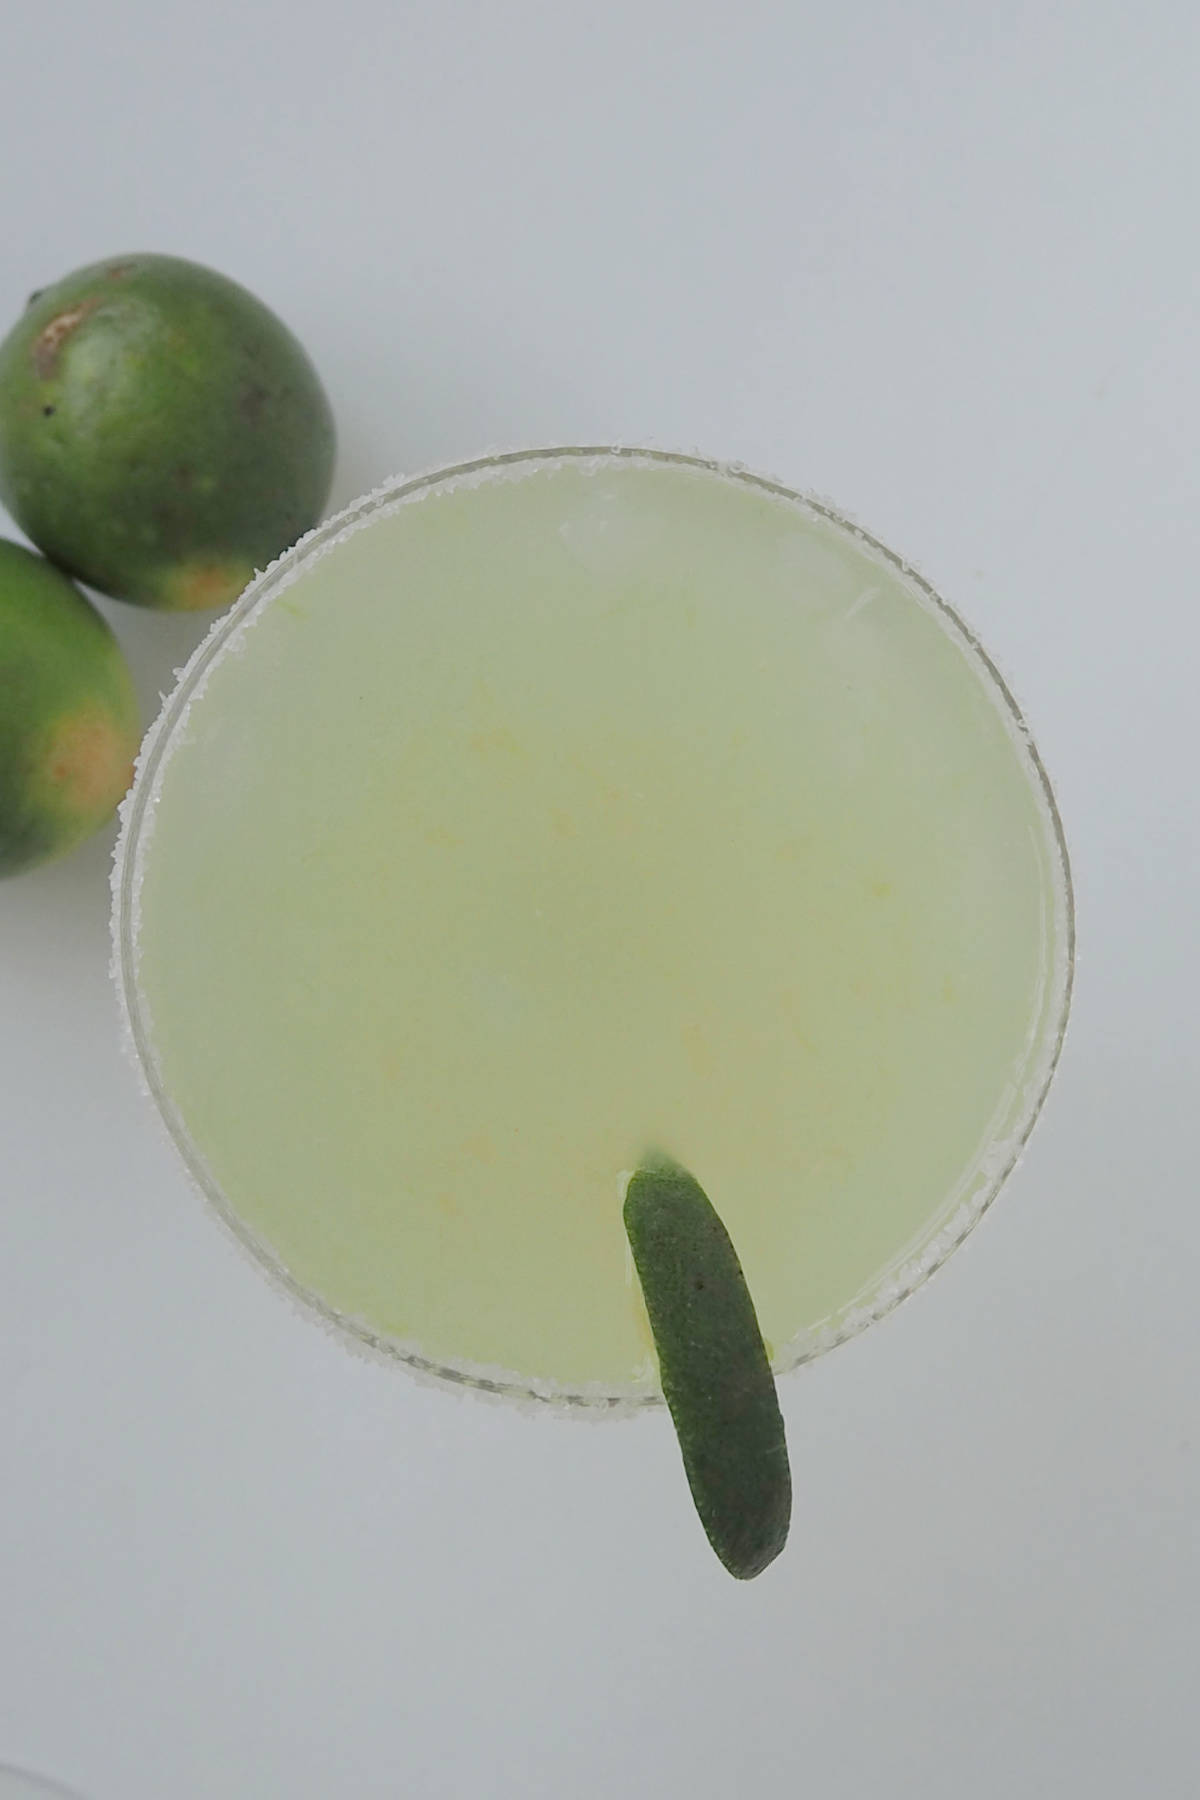 Overhead view of a margarita garnished with lime.